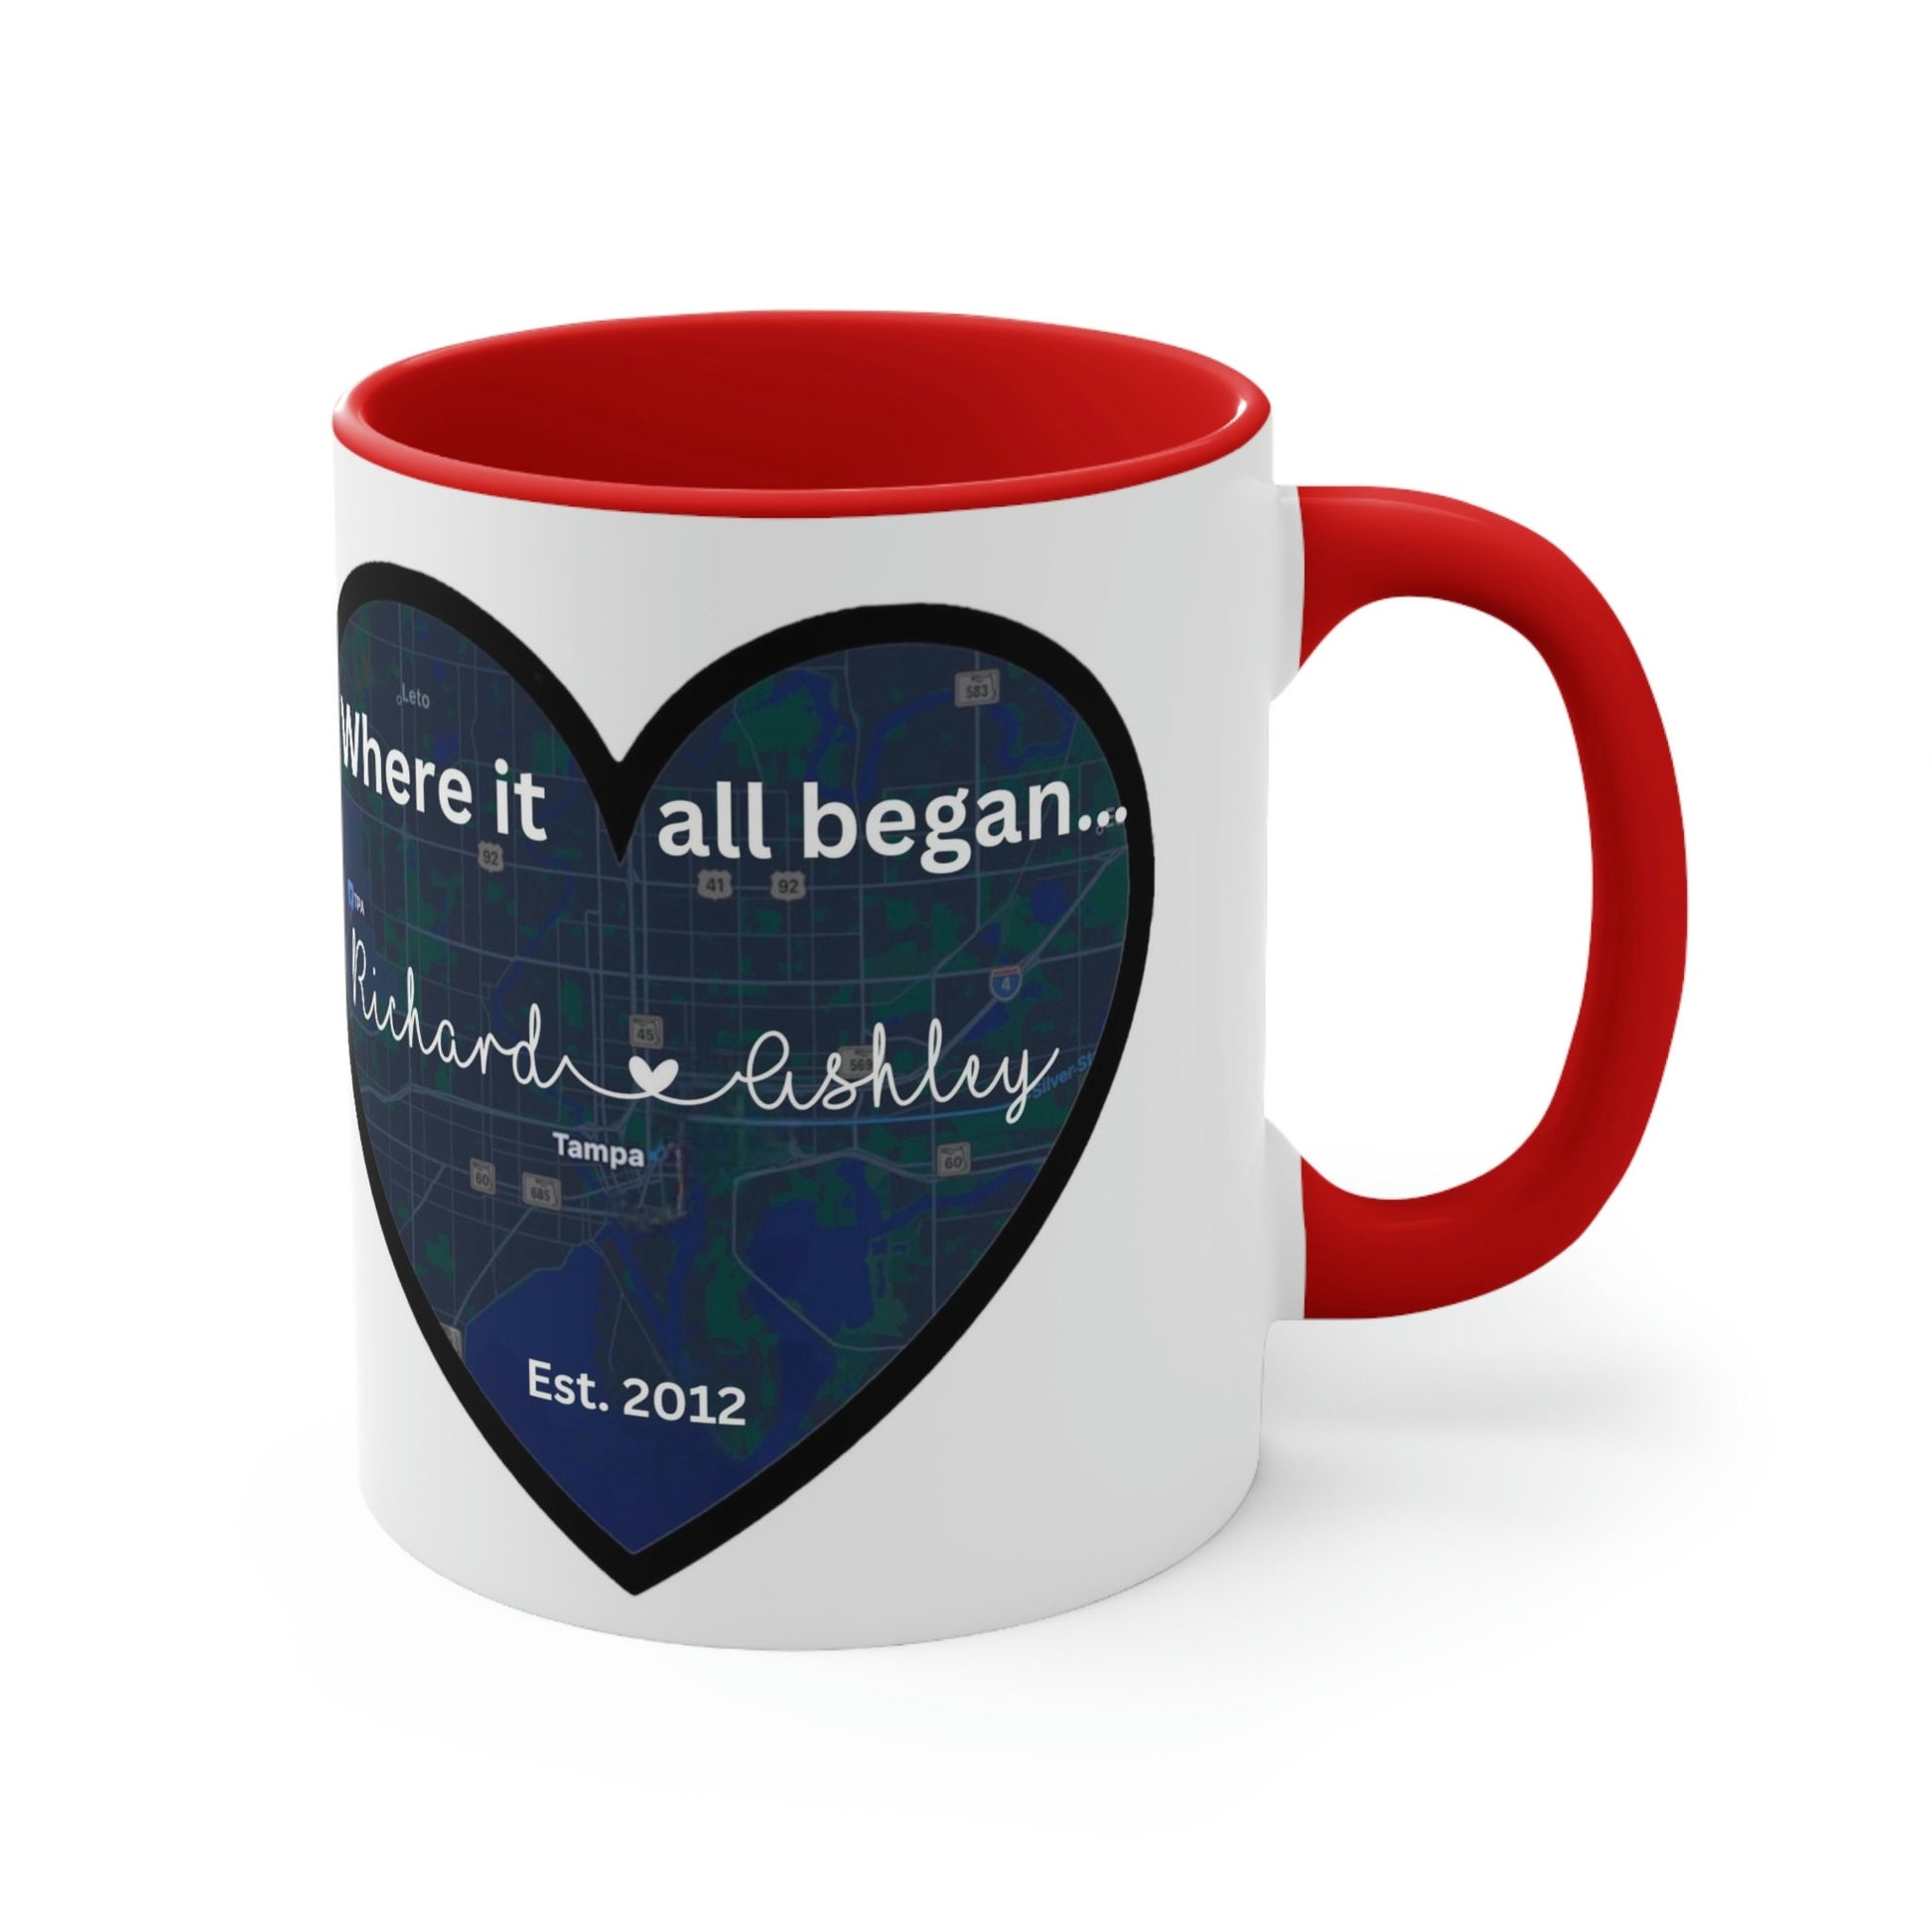 Where it all began Couples Heart Accent Coffee Mug, 11oz - Crypto Coin Display